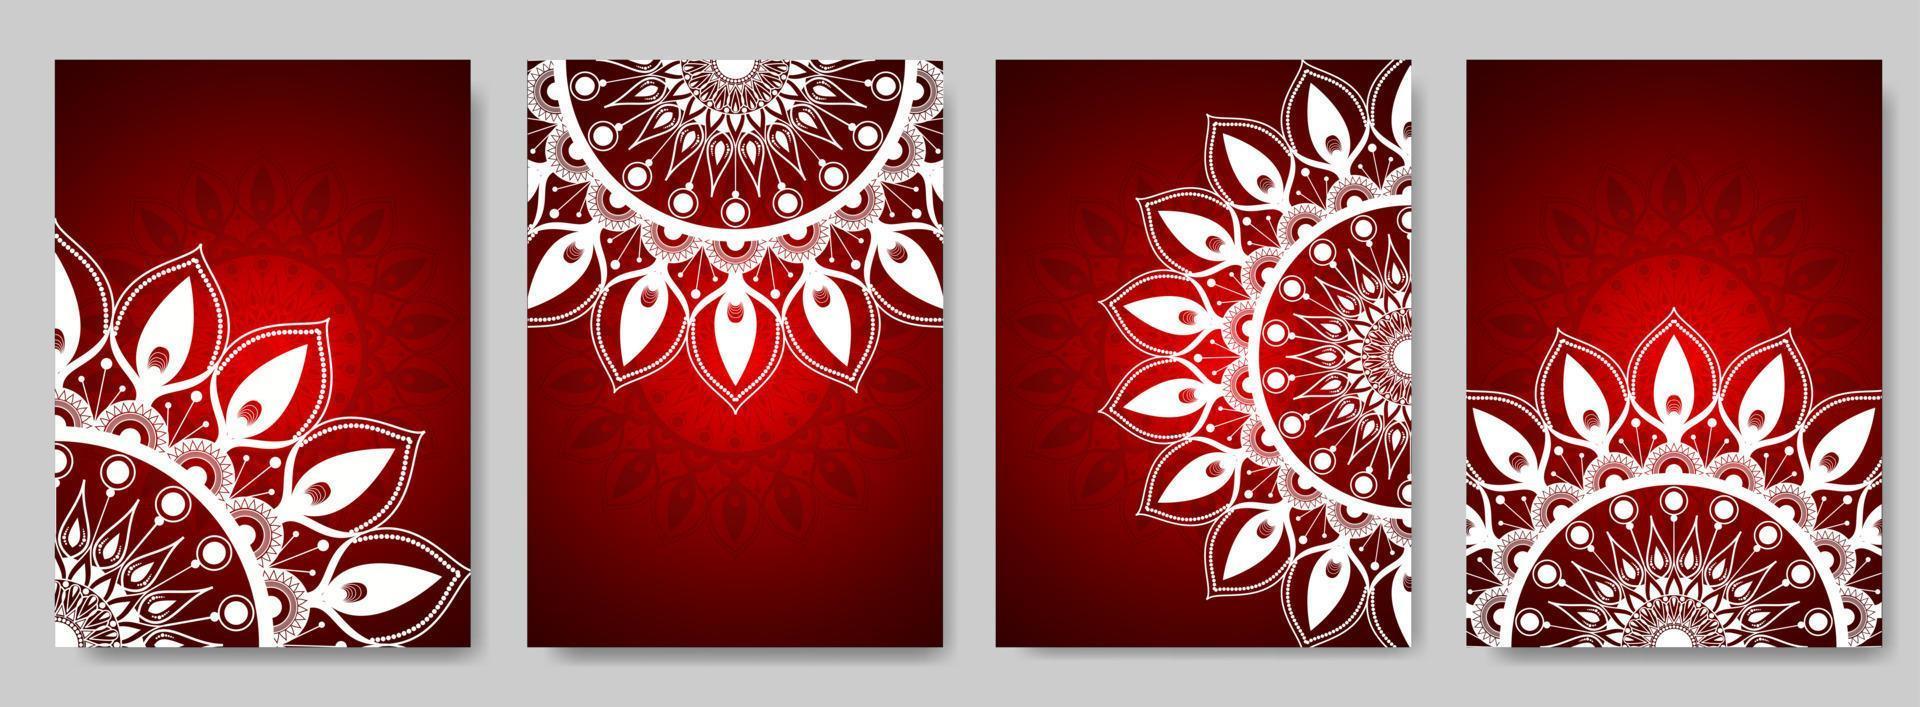 set of abstract backgrounds with mandala ornaments.  red background design can be used for textiles, greeting cards, covers. vector